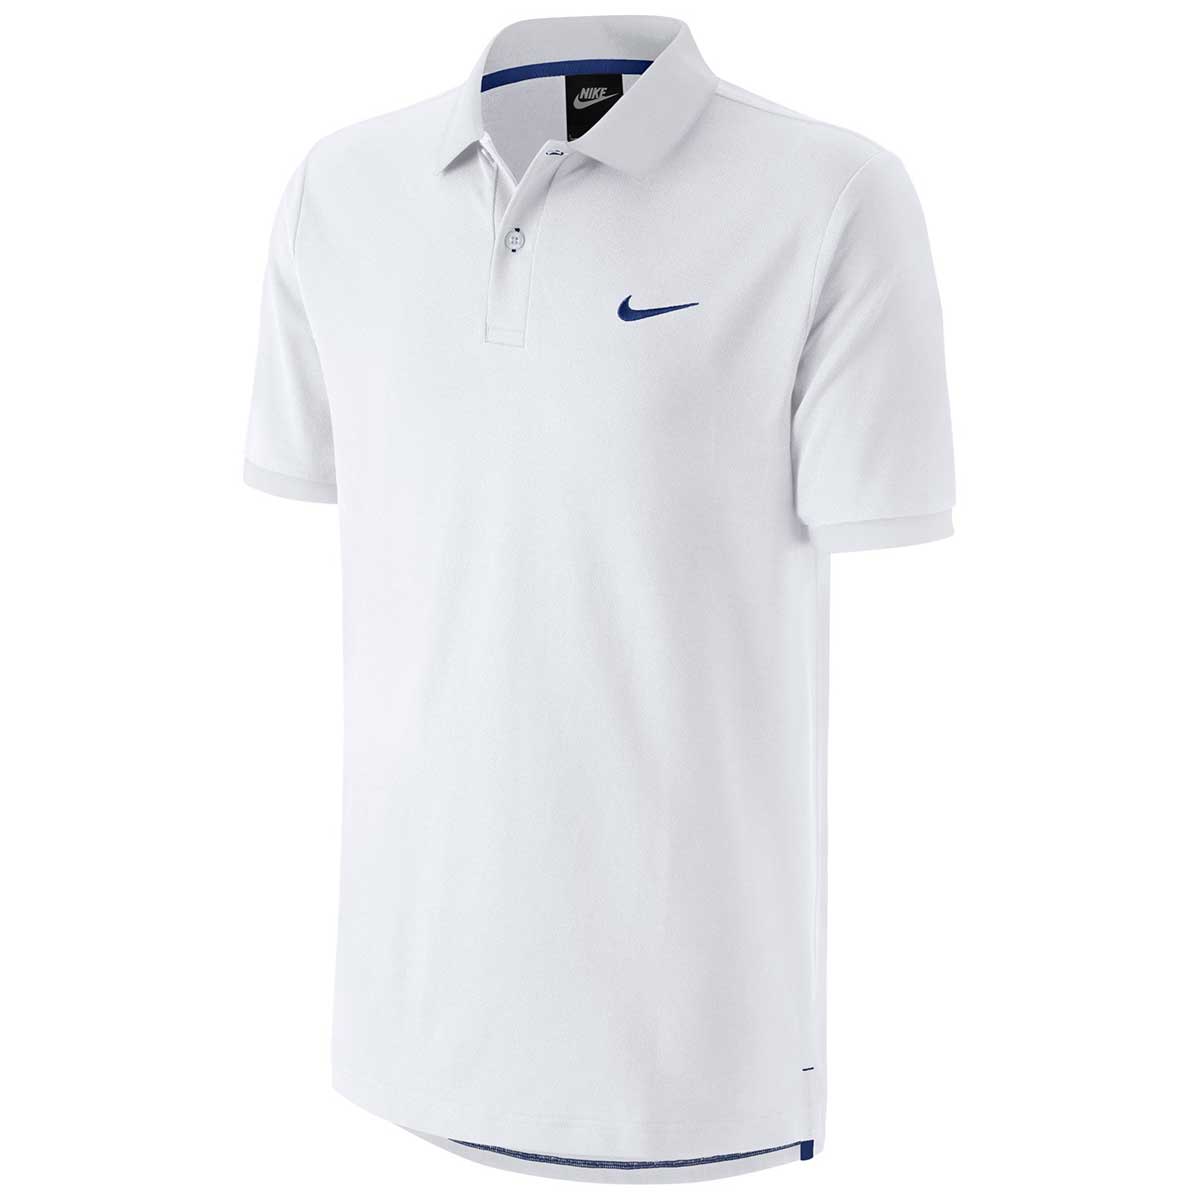 Buy nike polo t shirts india - 65% OFF!